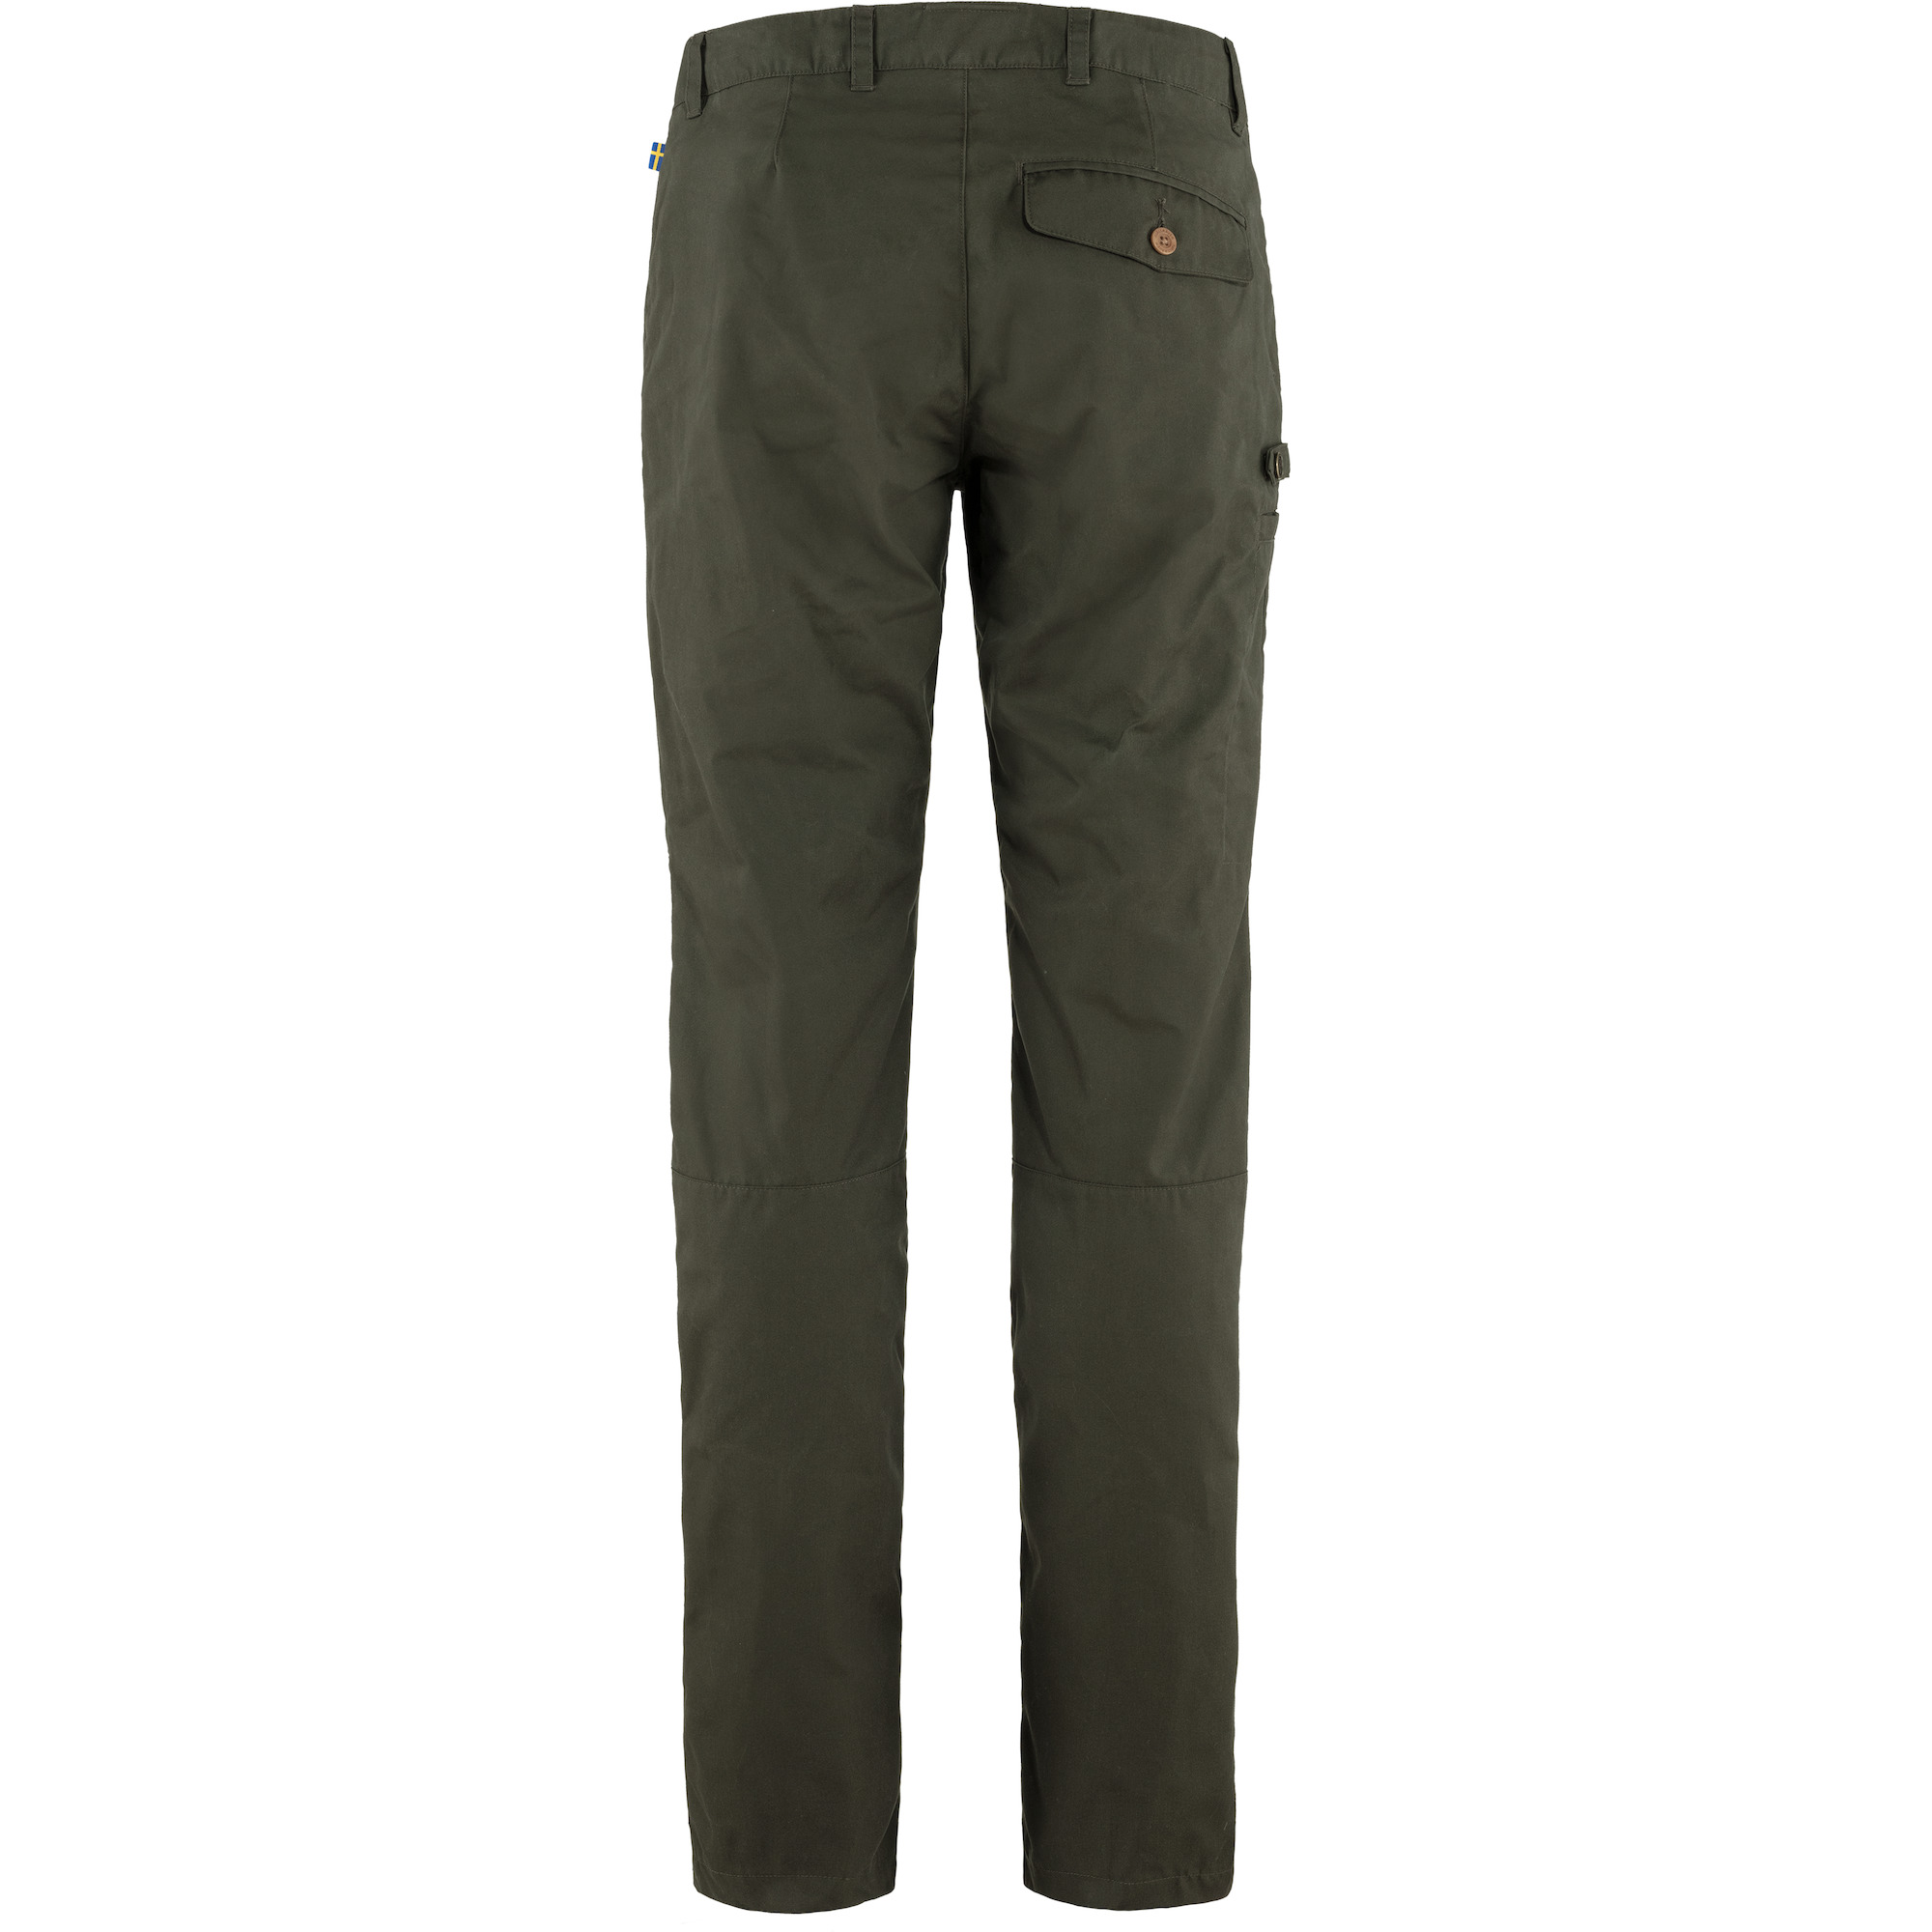 Shooting trousers and breeks for women  Developed by shooters for all  types of shooting  Härkila